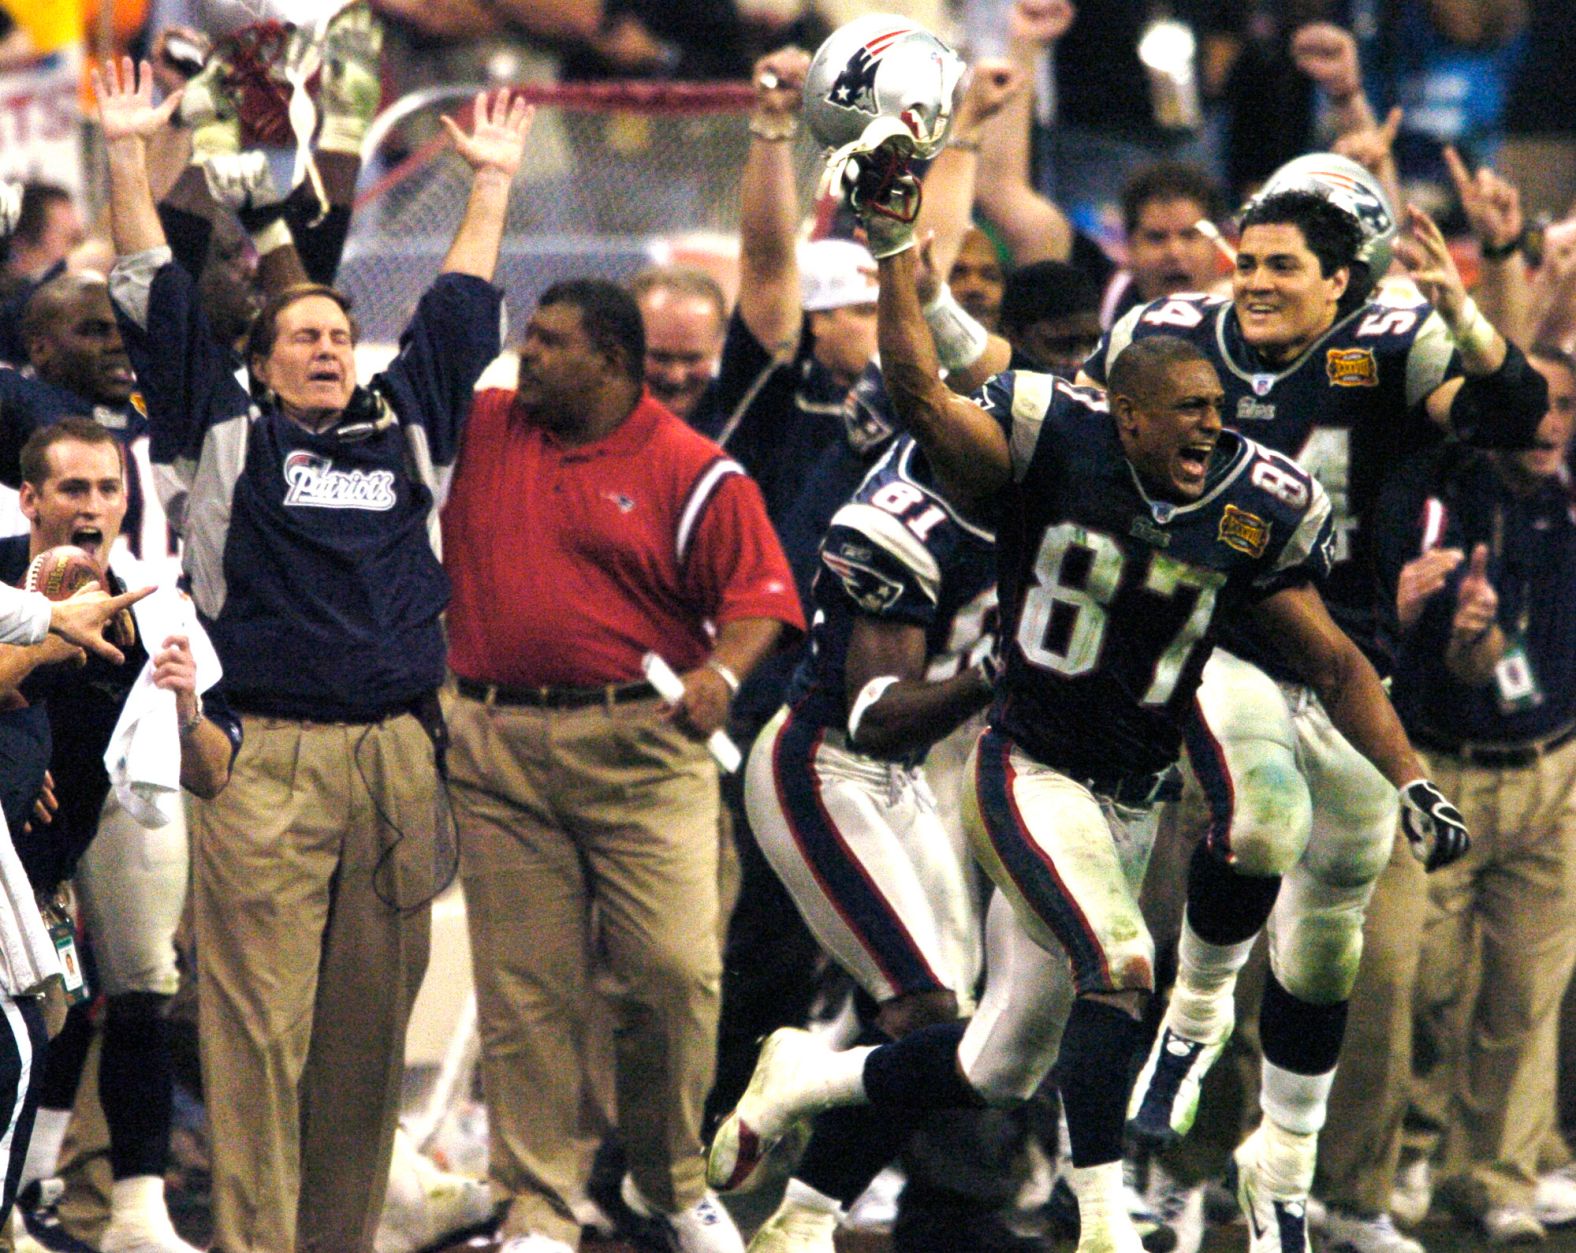 Belichick and the Patriots react after winning another Super Bowl in 2004.